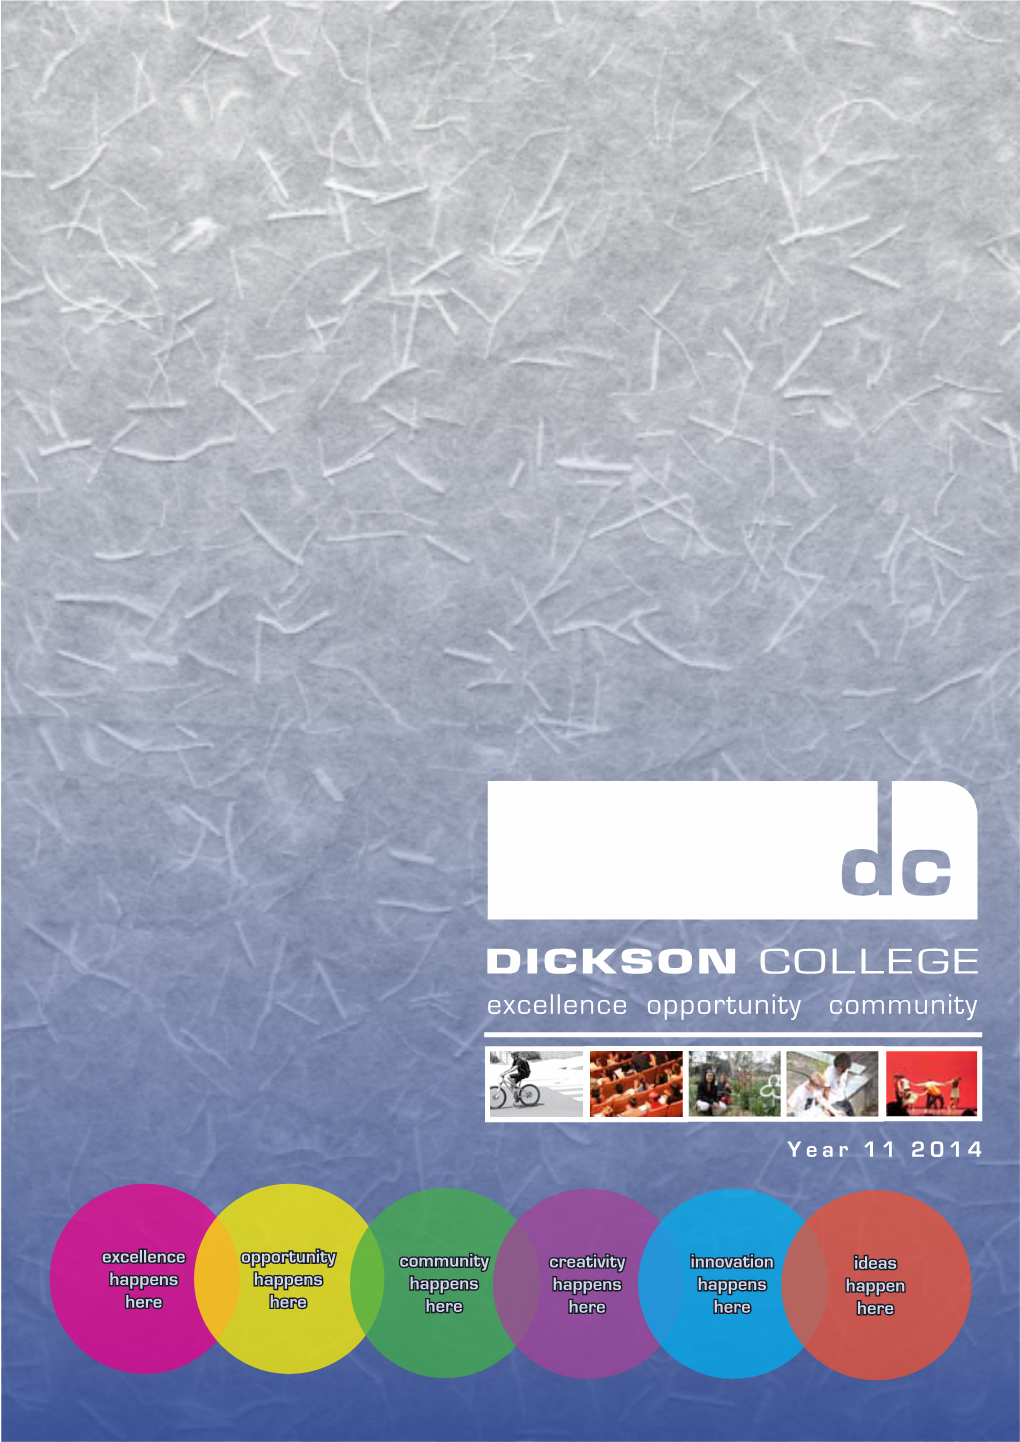 Dickson College at a Glance